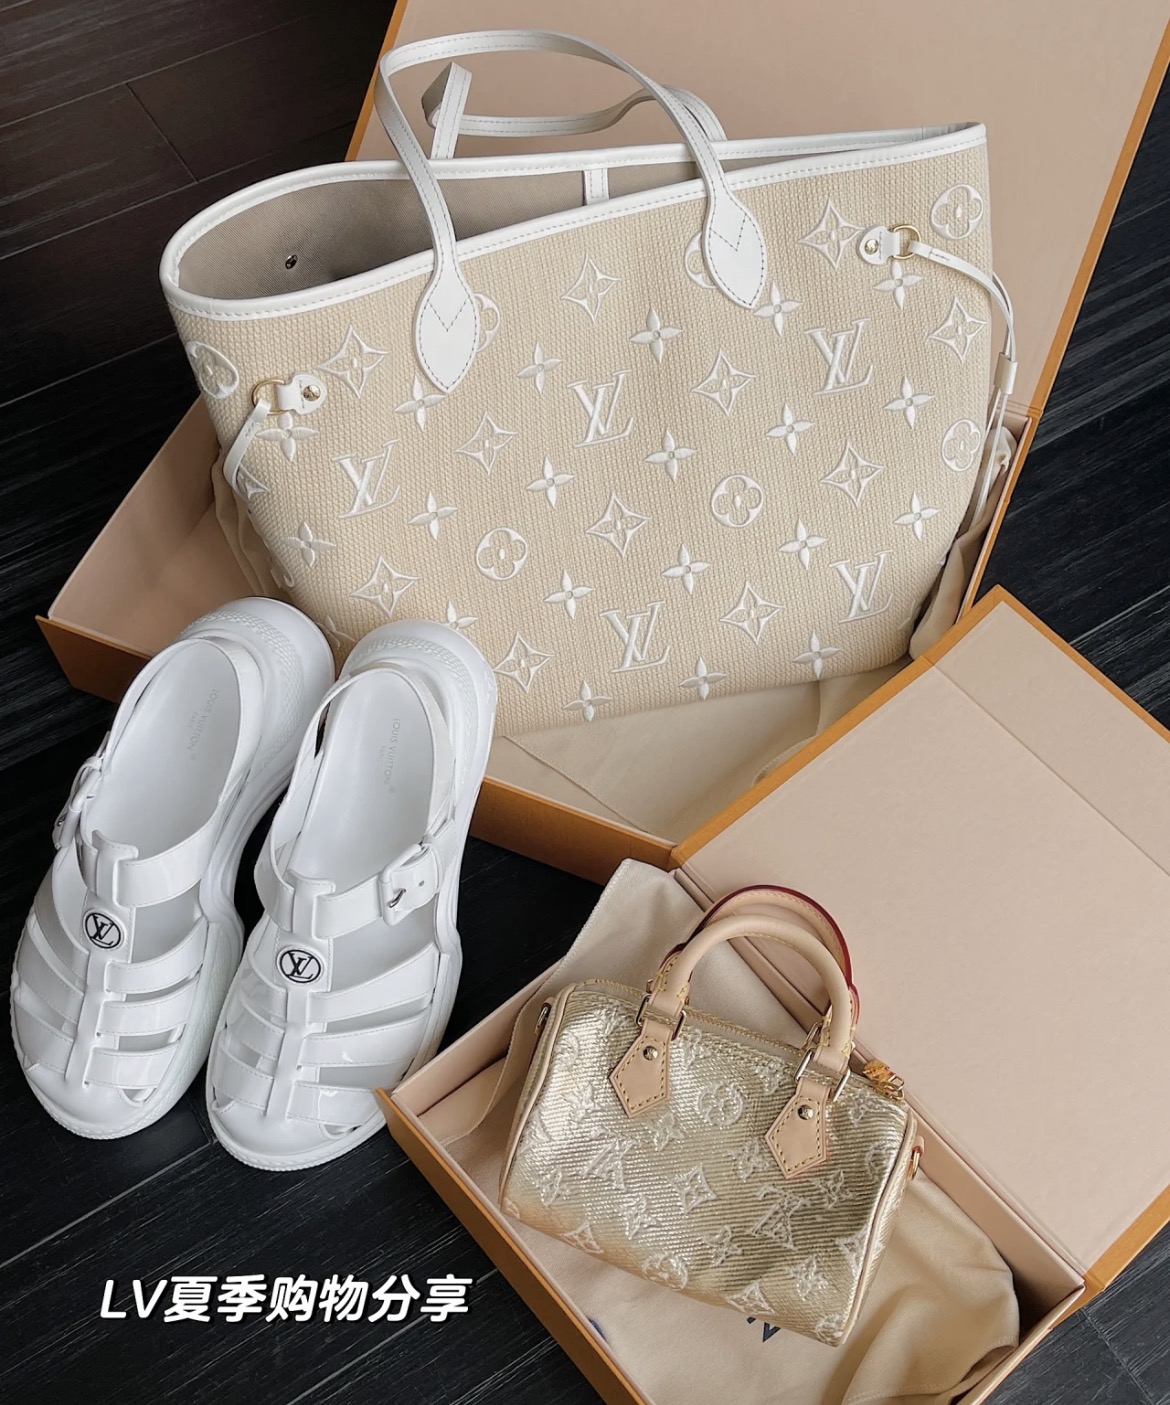 Louis Vuitton LV Neverfull Bags Handbags for sale cheap now
 White Weave Summer Collection M22839